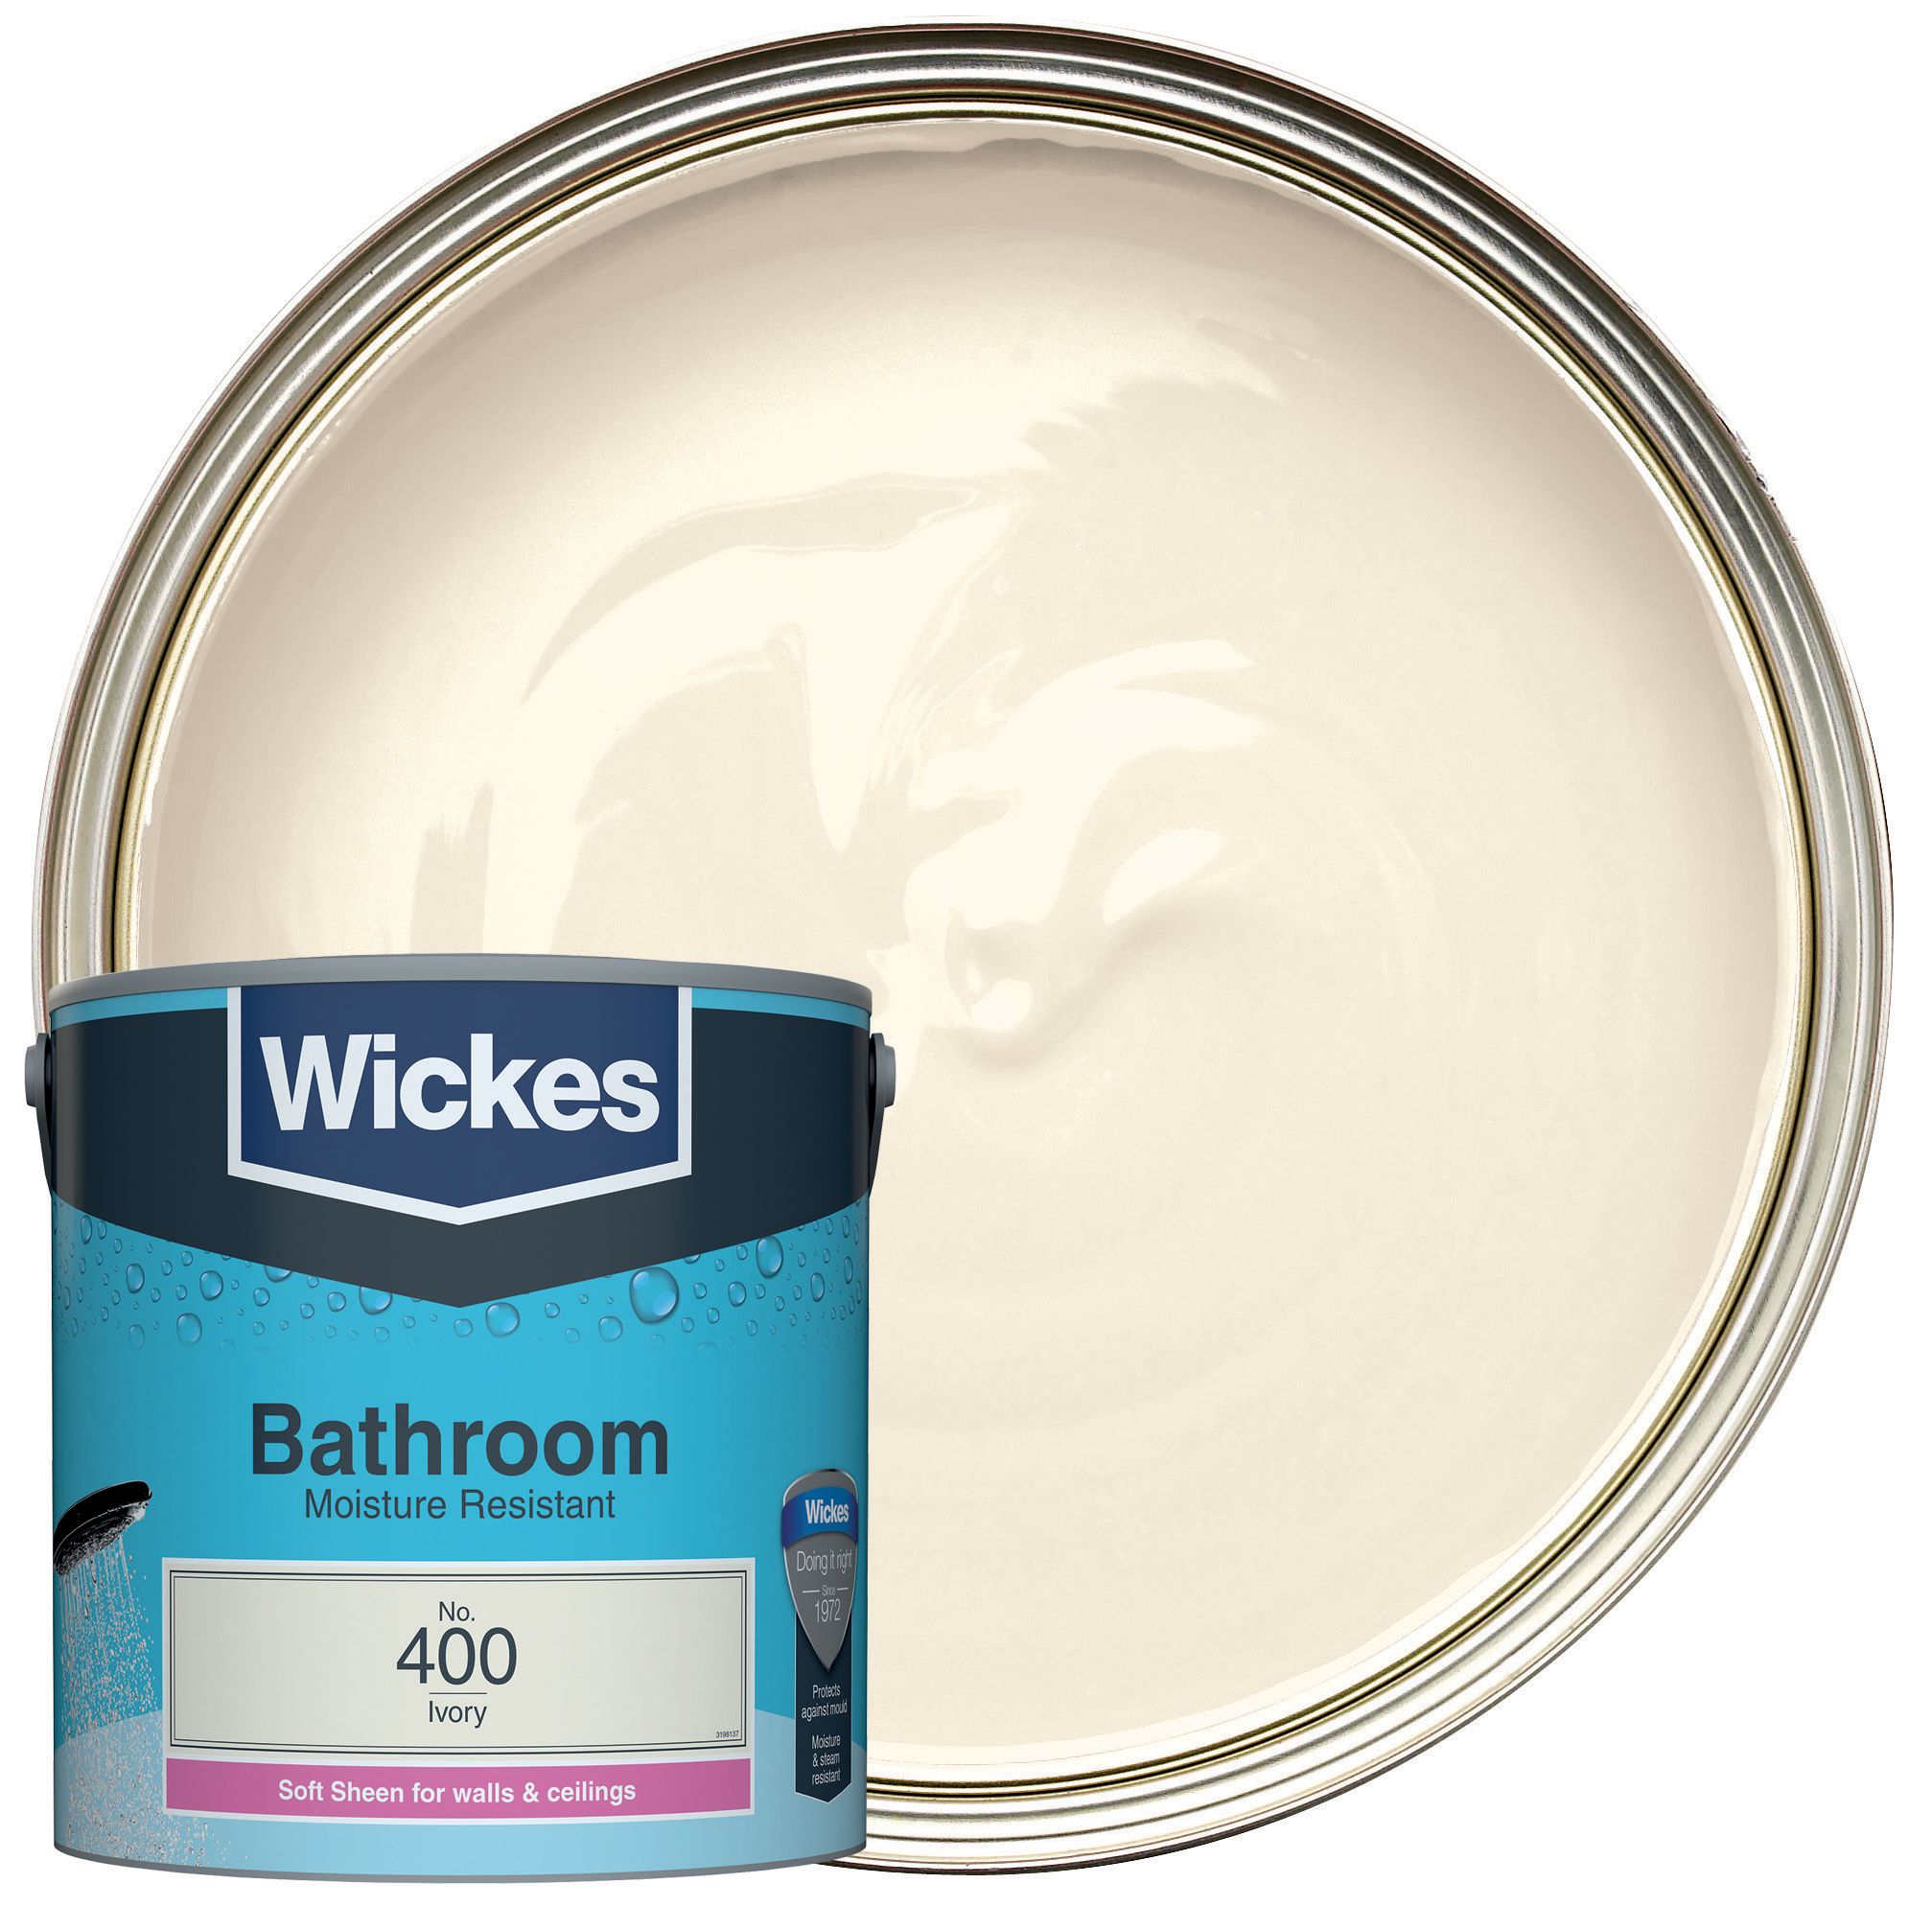 Image of Wickes Bathroom Soft Sheen Emulsion Paint - Ivory No.400 - 2.5L